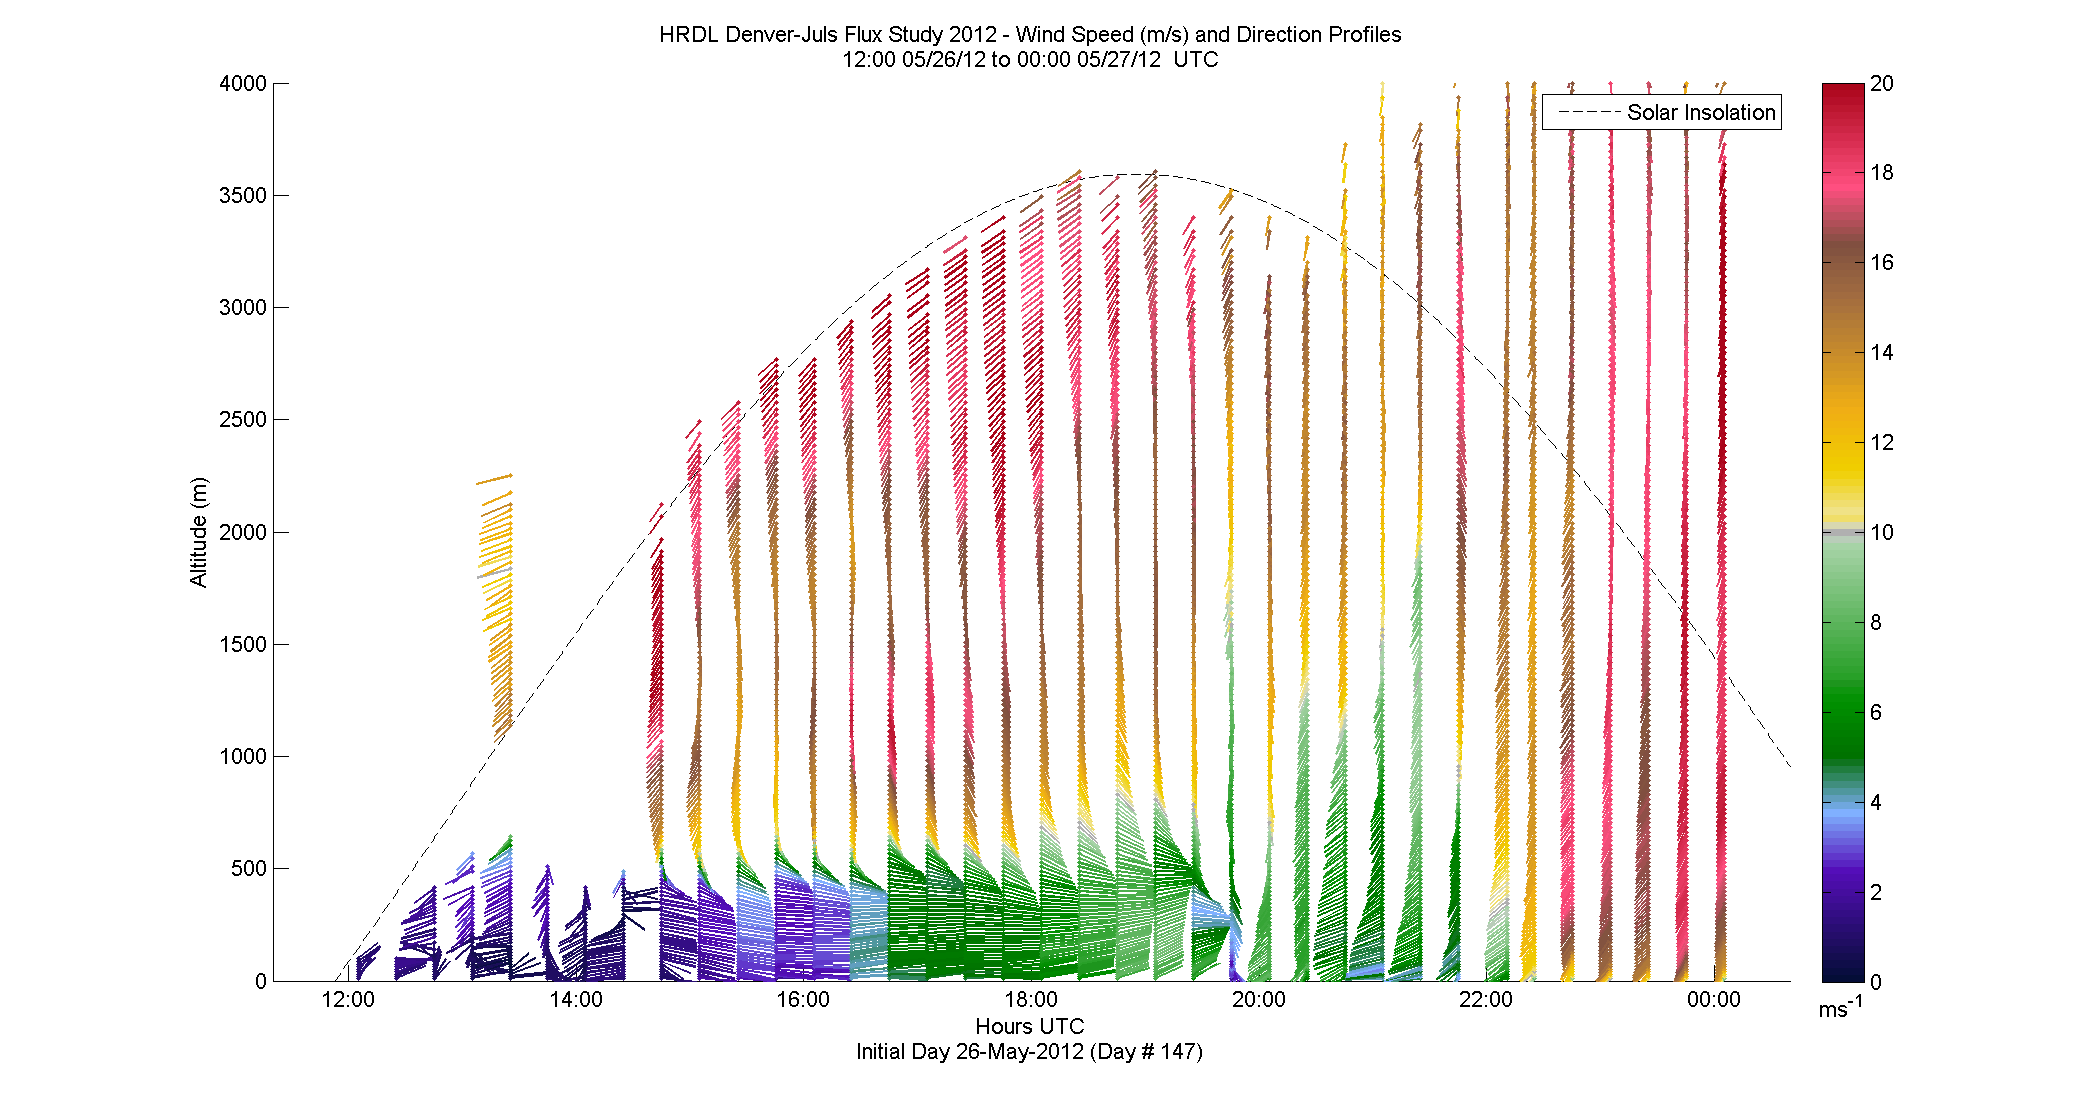 HRDL speed and direction profile - May 26 pm